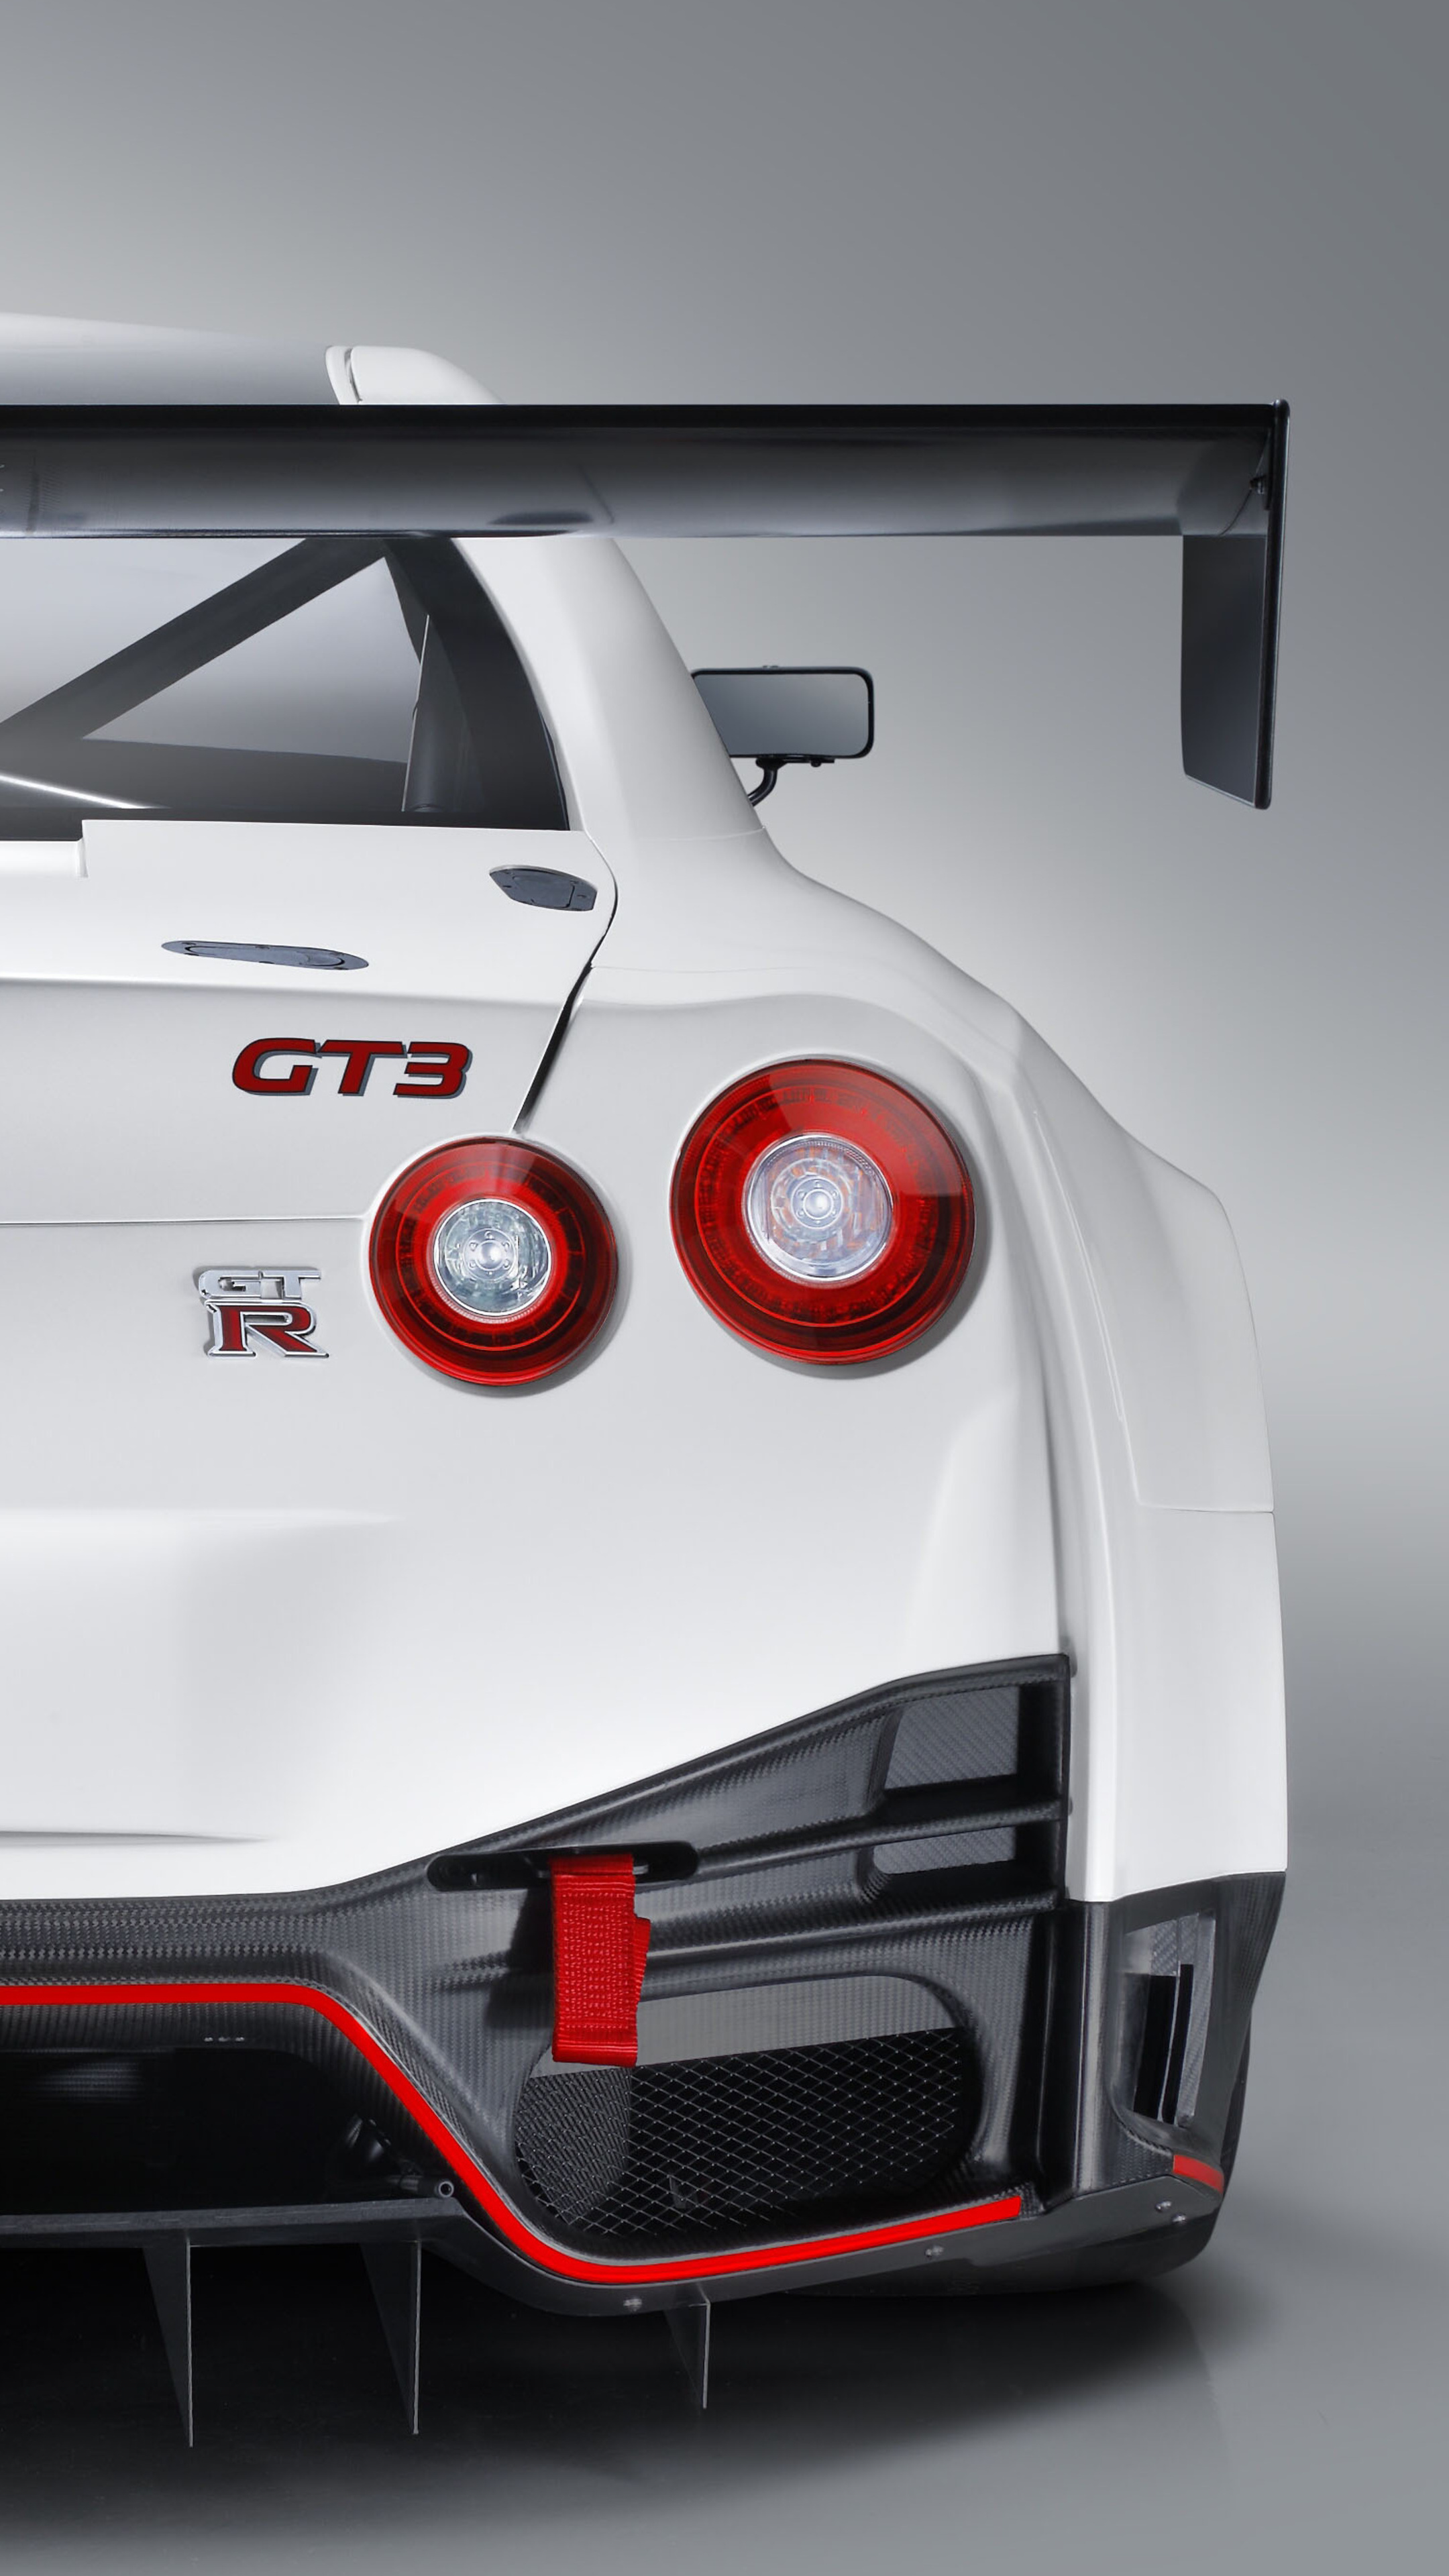 Nissan GT-R Nismo, GT3 racing, Xperia wallpapers, 4k images, 2160x3840 4K Handy